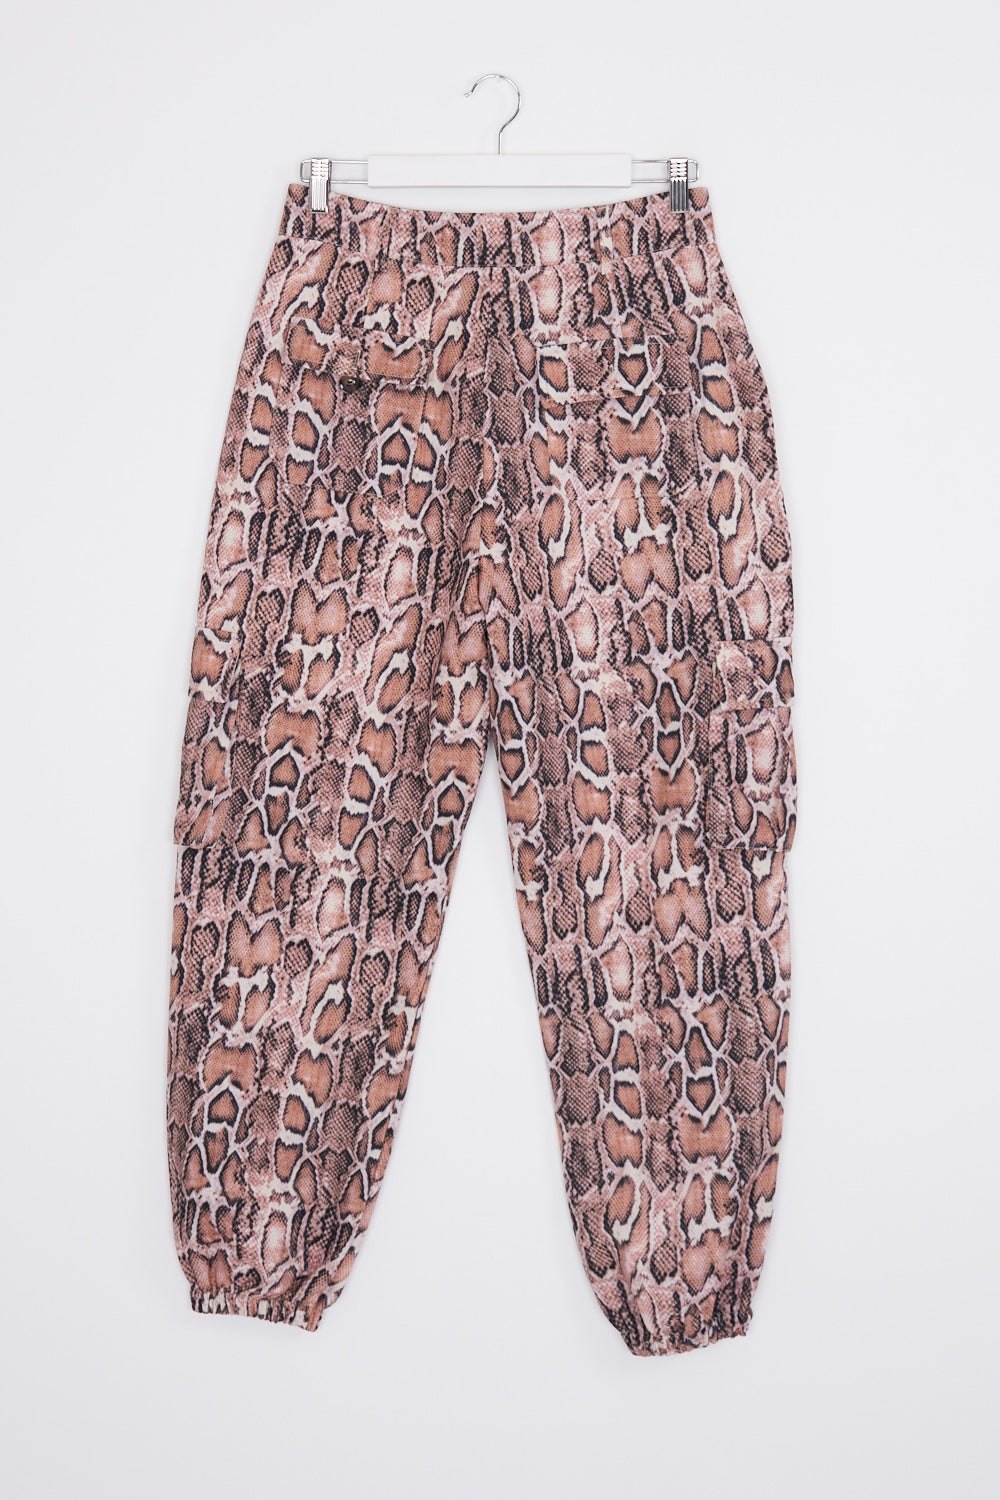 Chic Boutique Pink Snake Print Cargo Pants L